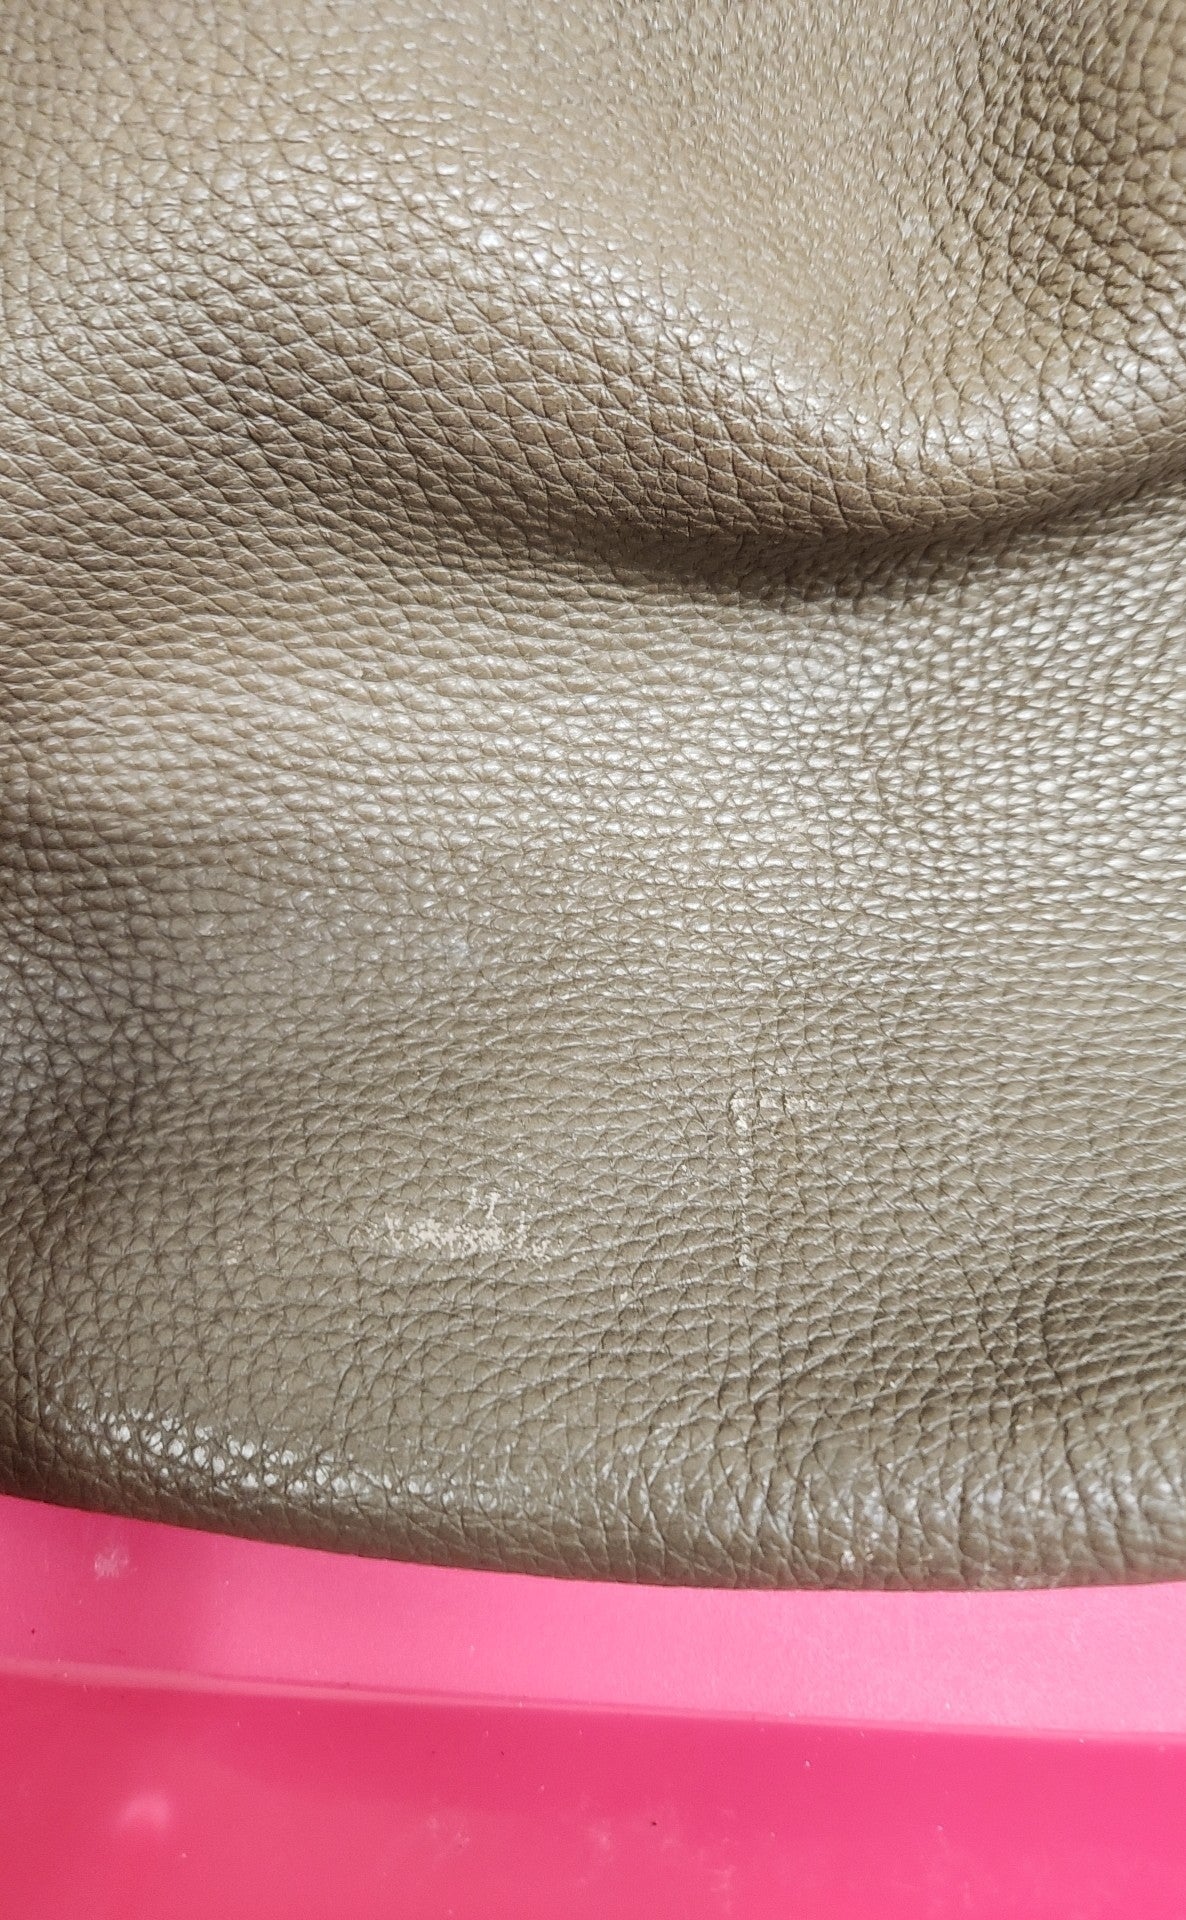 Marc by Marc Jacobs Brown Purse